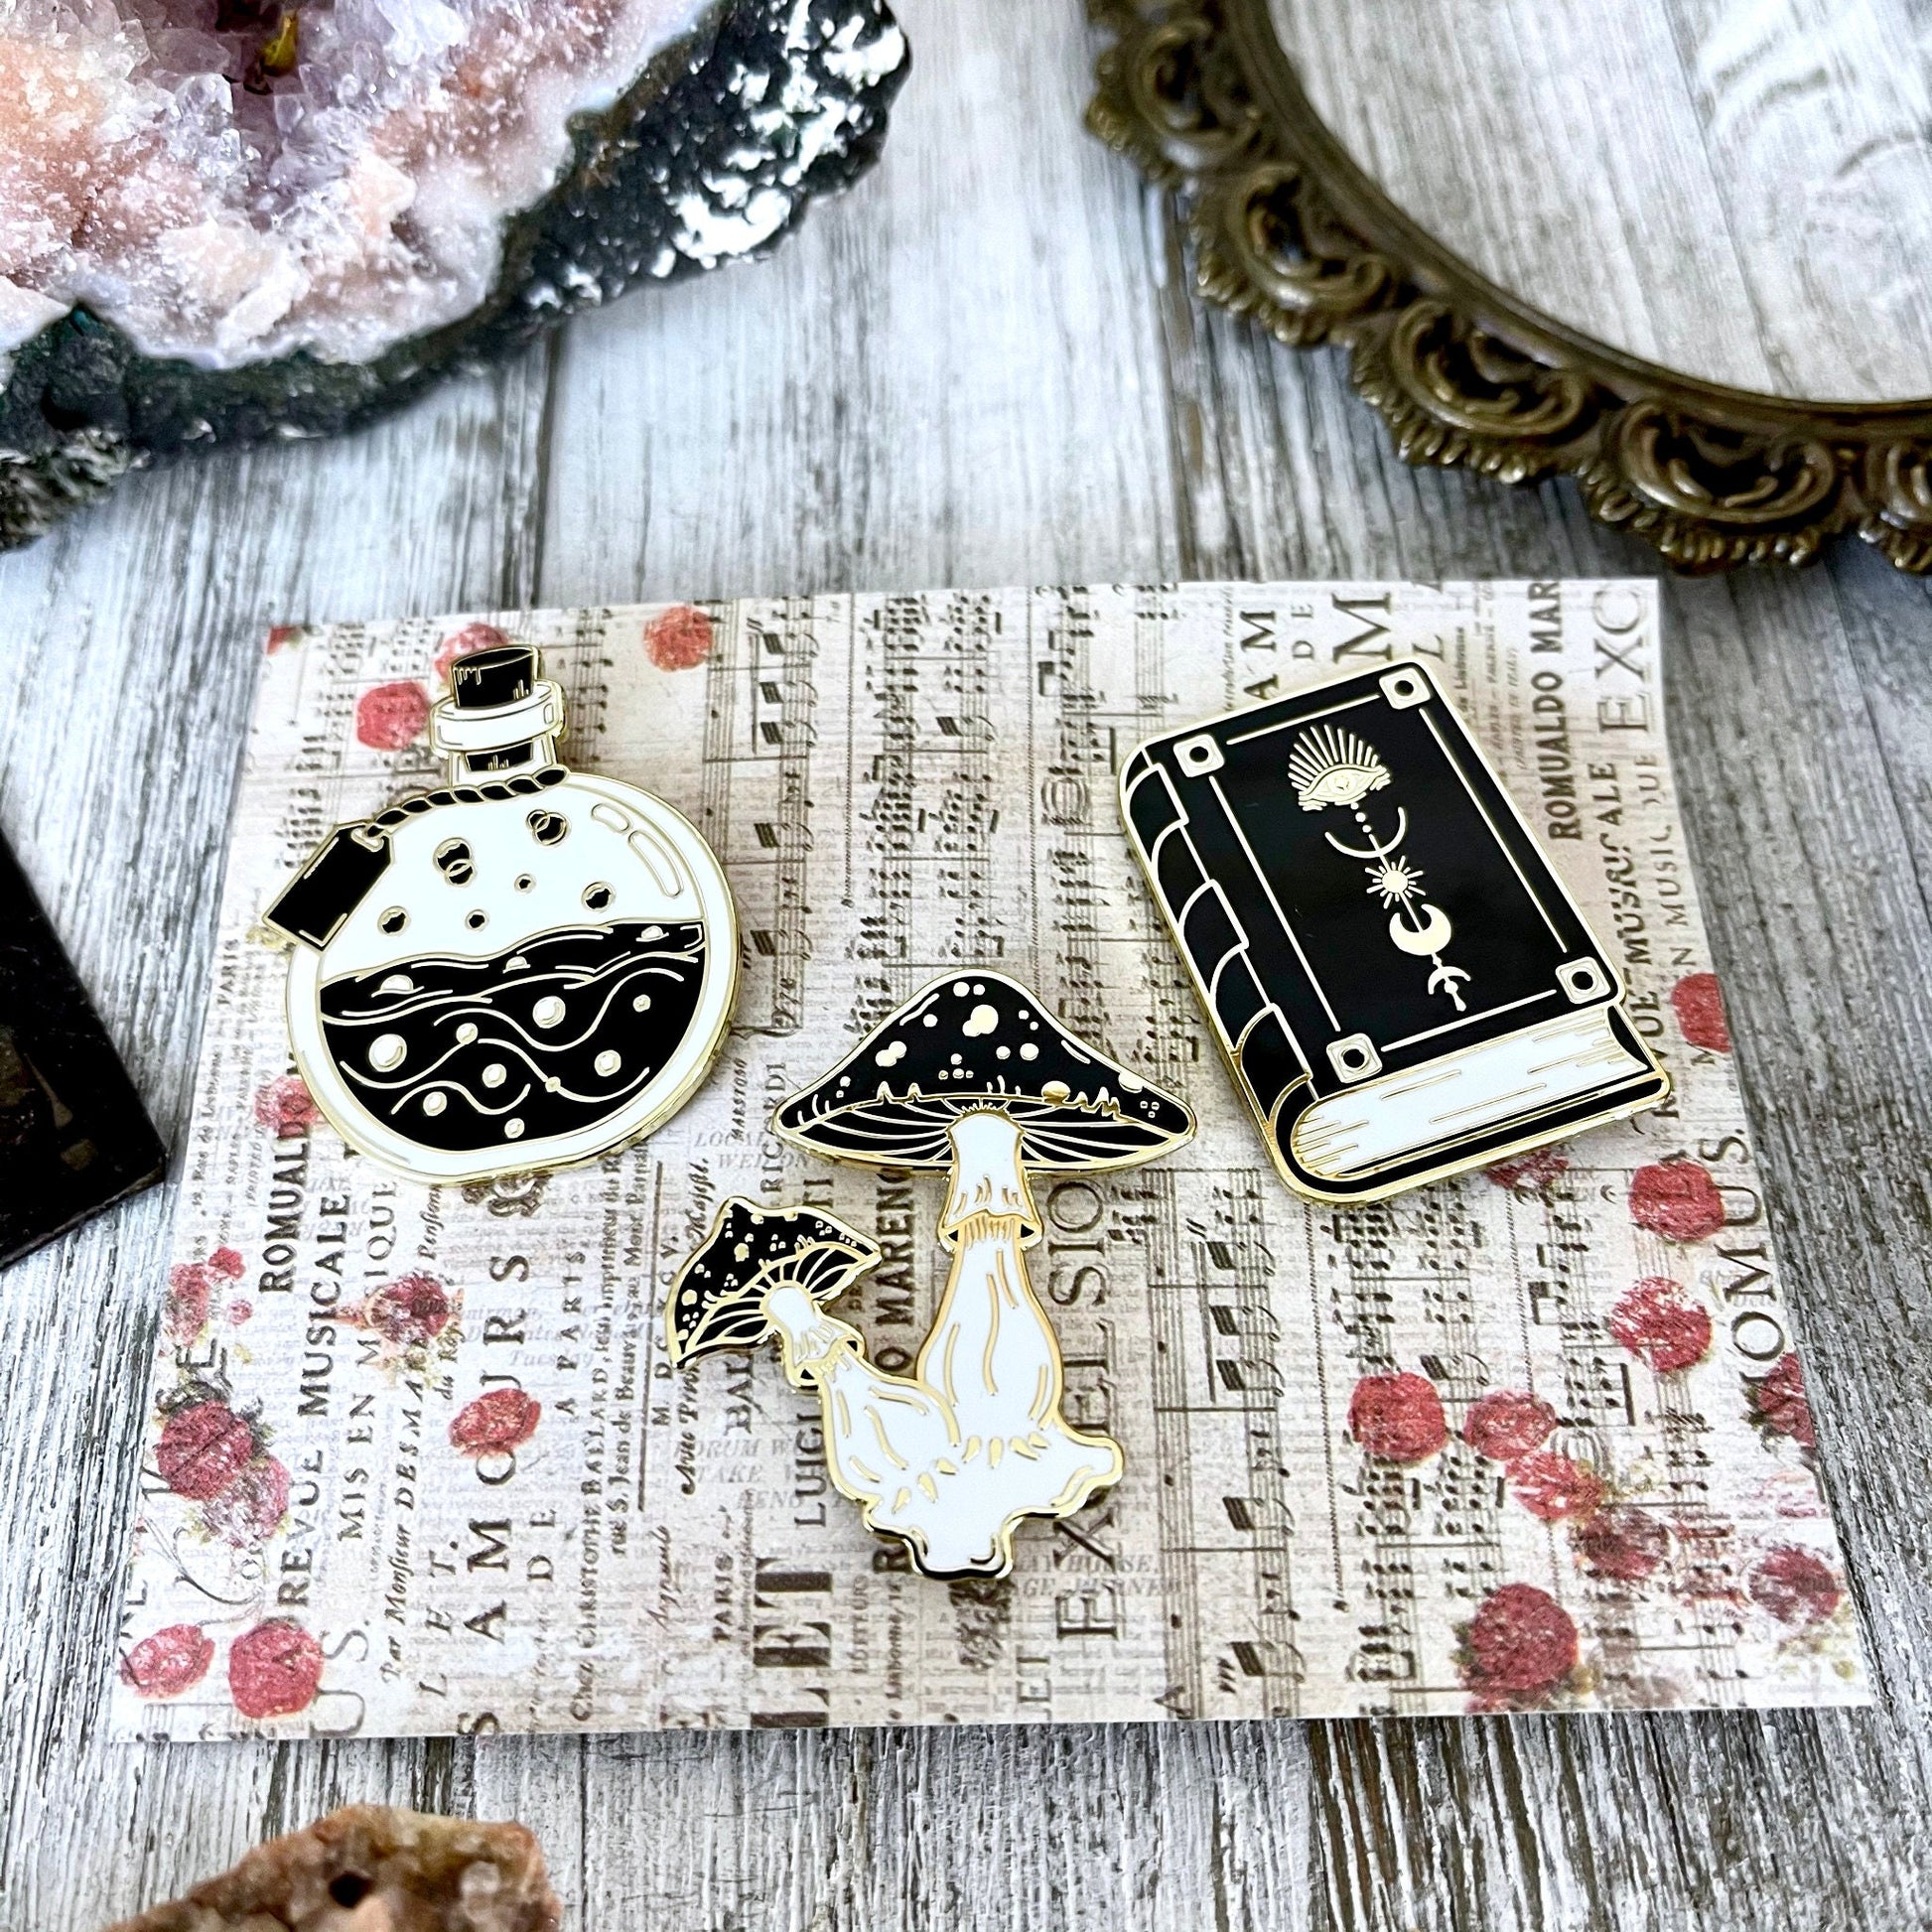 Accessories, cute pins, earthy pins, Enamel Pins, Etsy ID: 1017543096, goth pins, Mushroom Pin, Patches & Pins, Pin Set, Pins & Pinback Buttons, Potion Bottle Pin, Witch, Witch Jewelry, Witchy, Witchy Book Pin